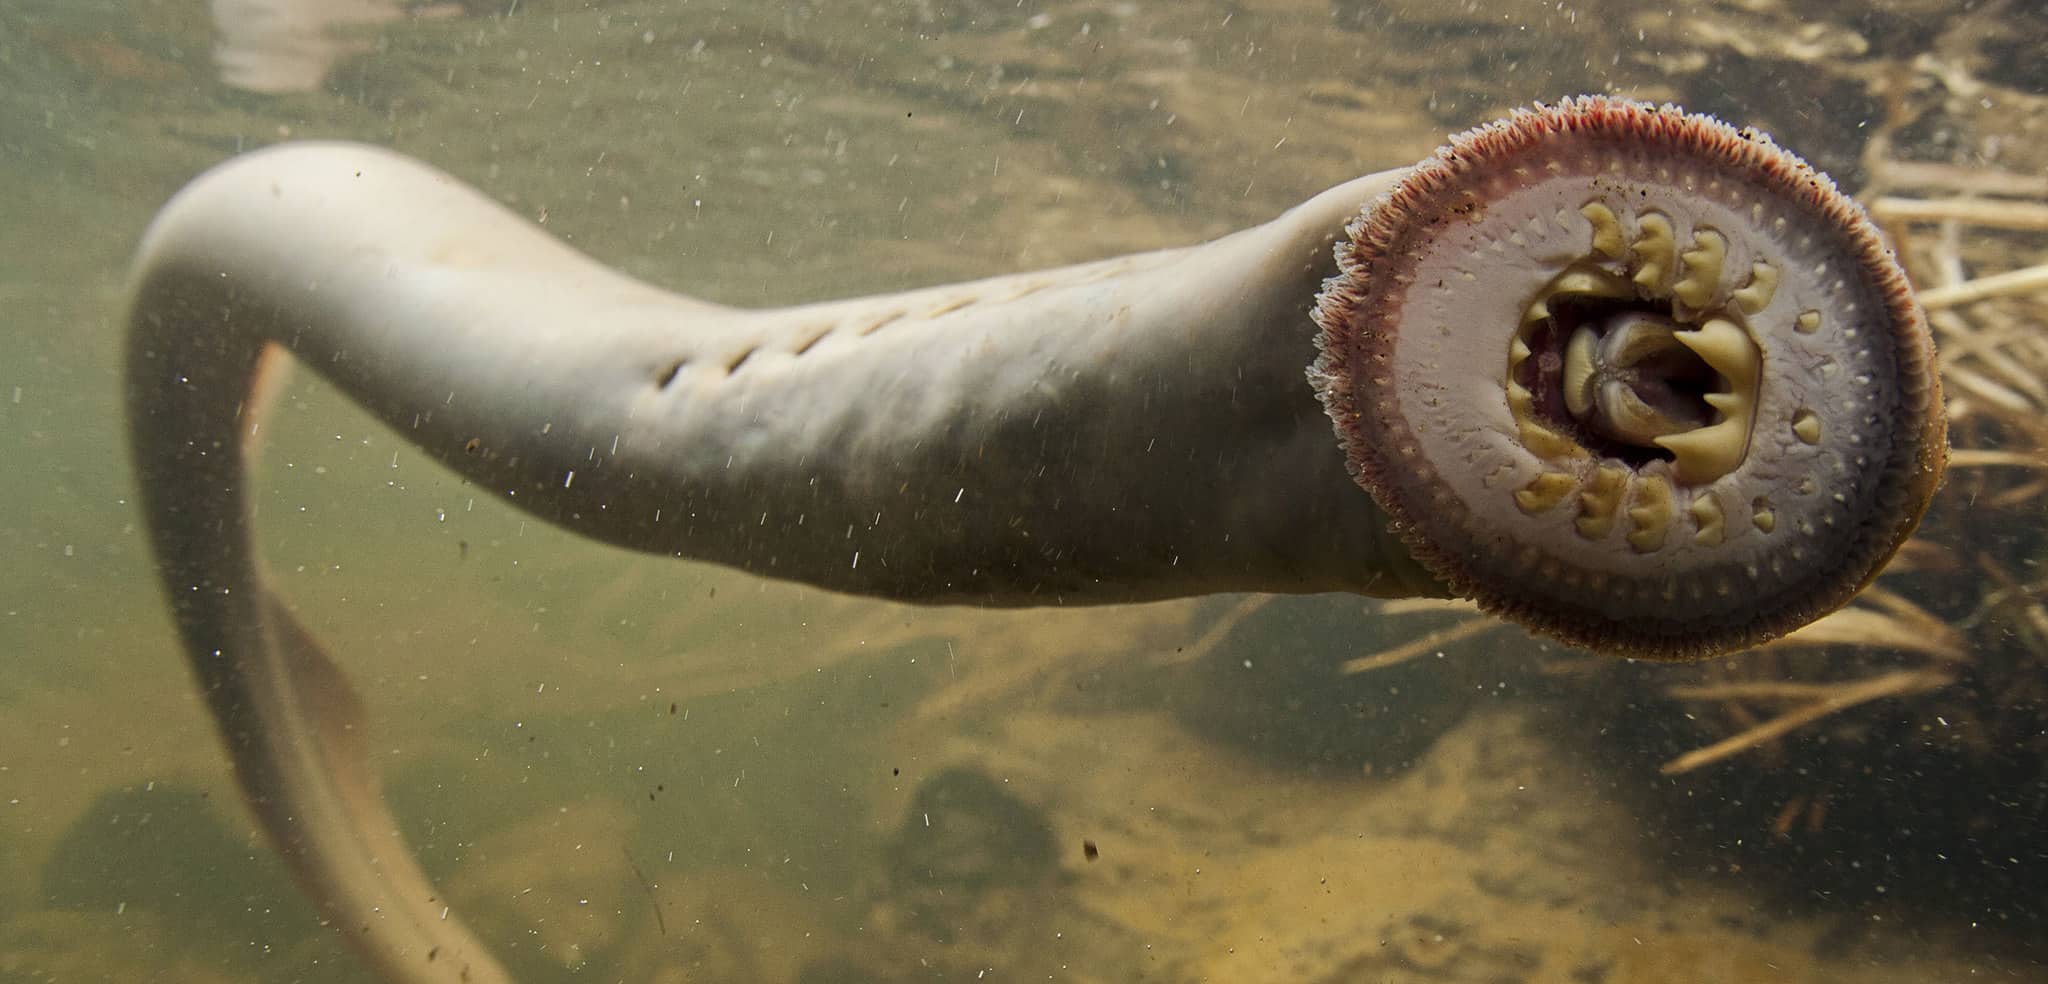 The sea's most terrifying fish is the lamprey.